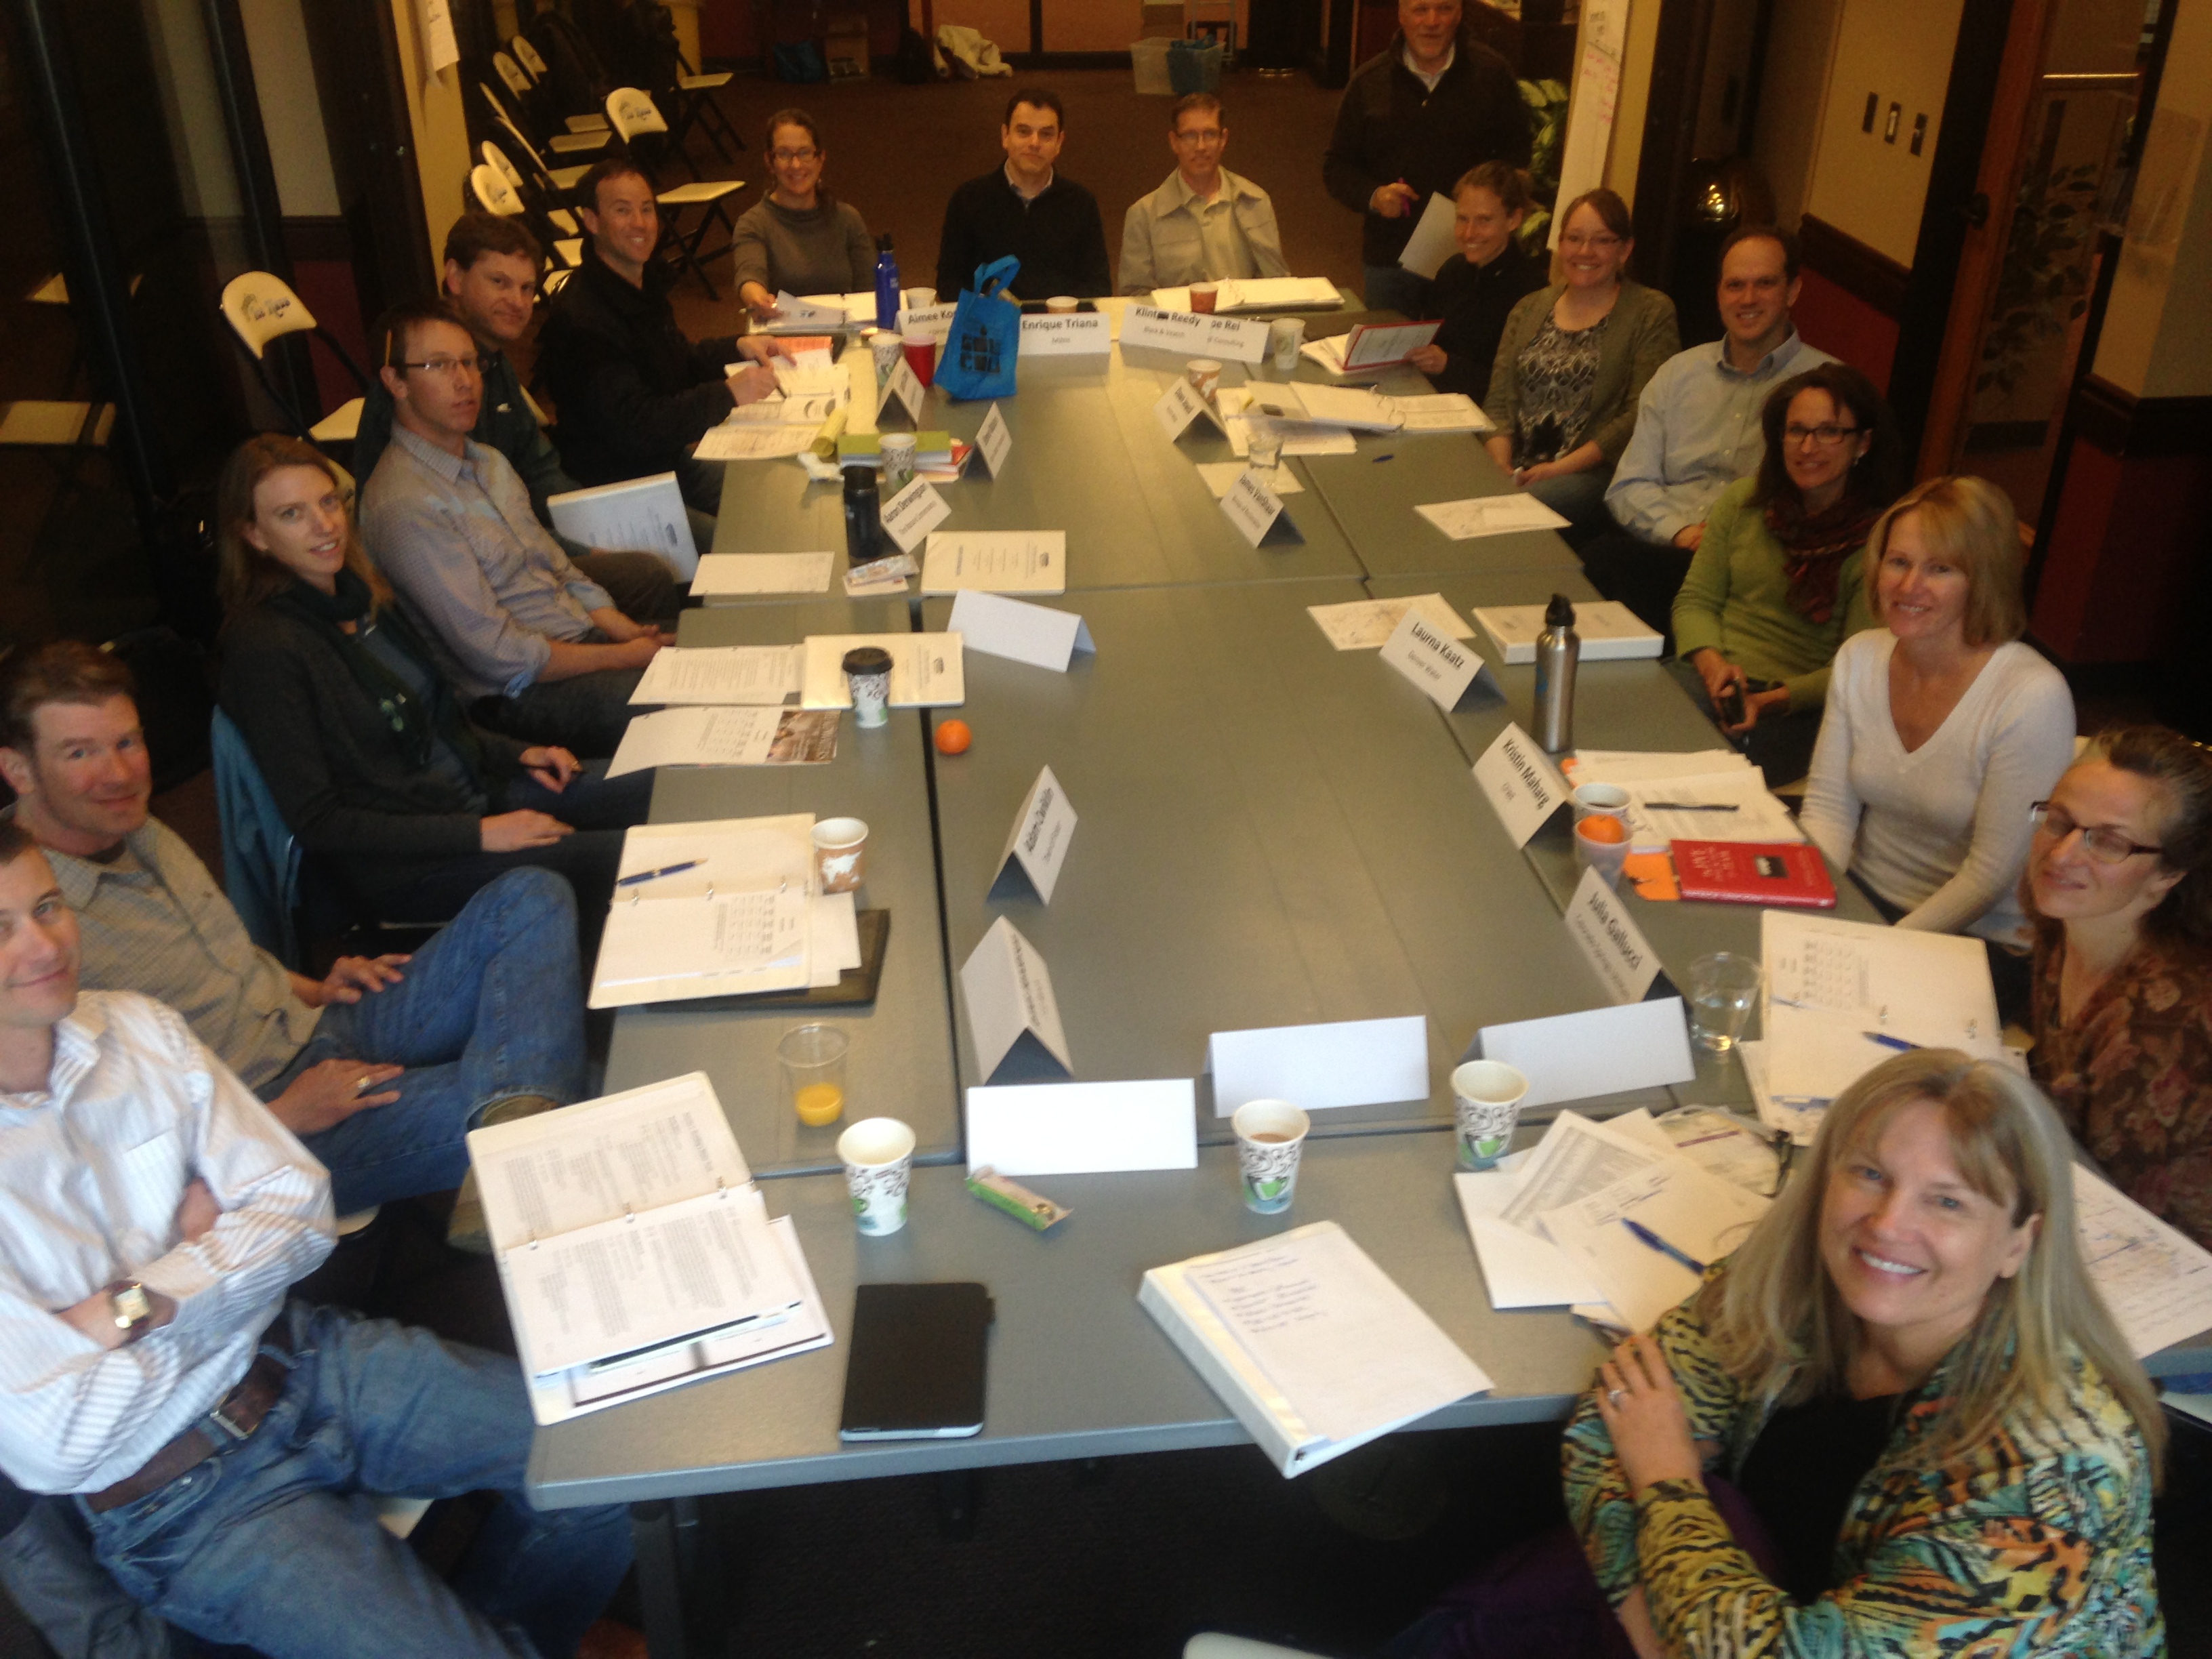 Class of 2014 during their March training with CFWE and MORF Consulting in Greeley